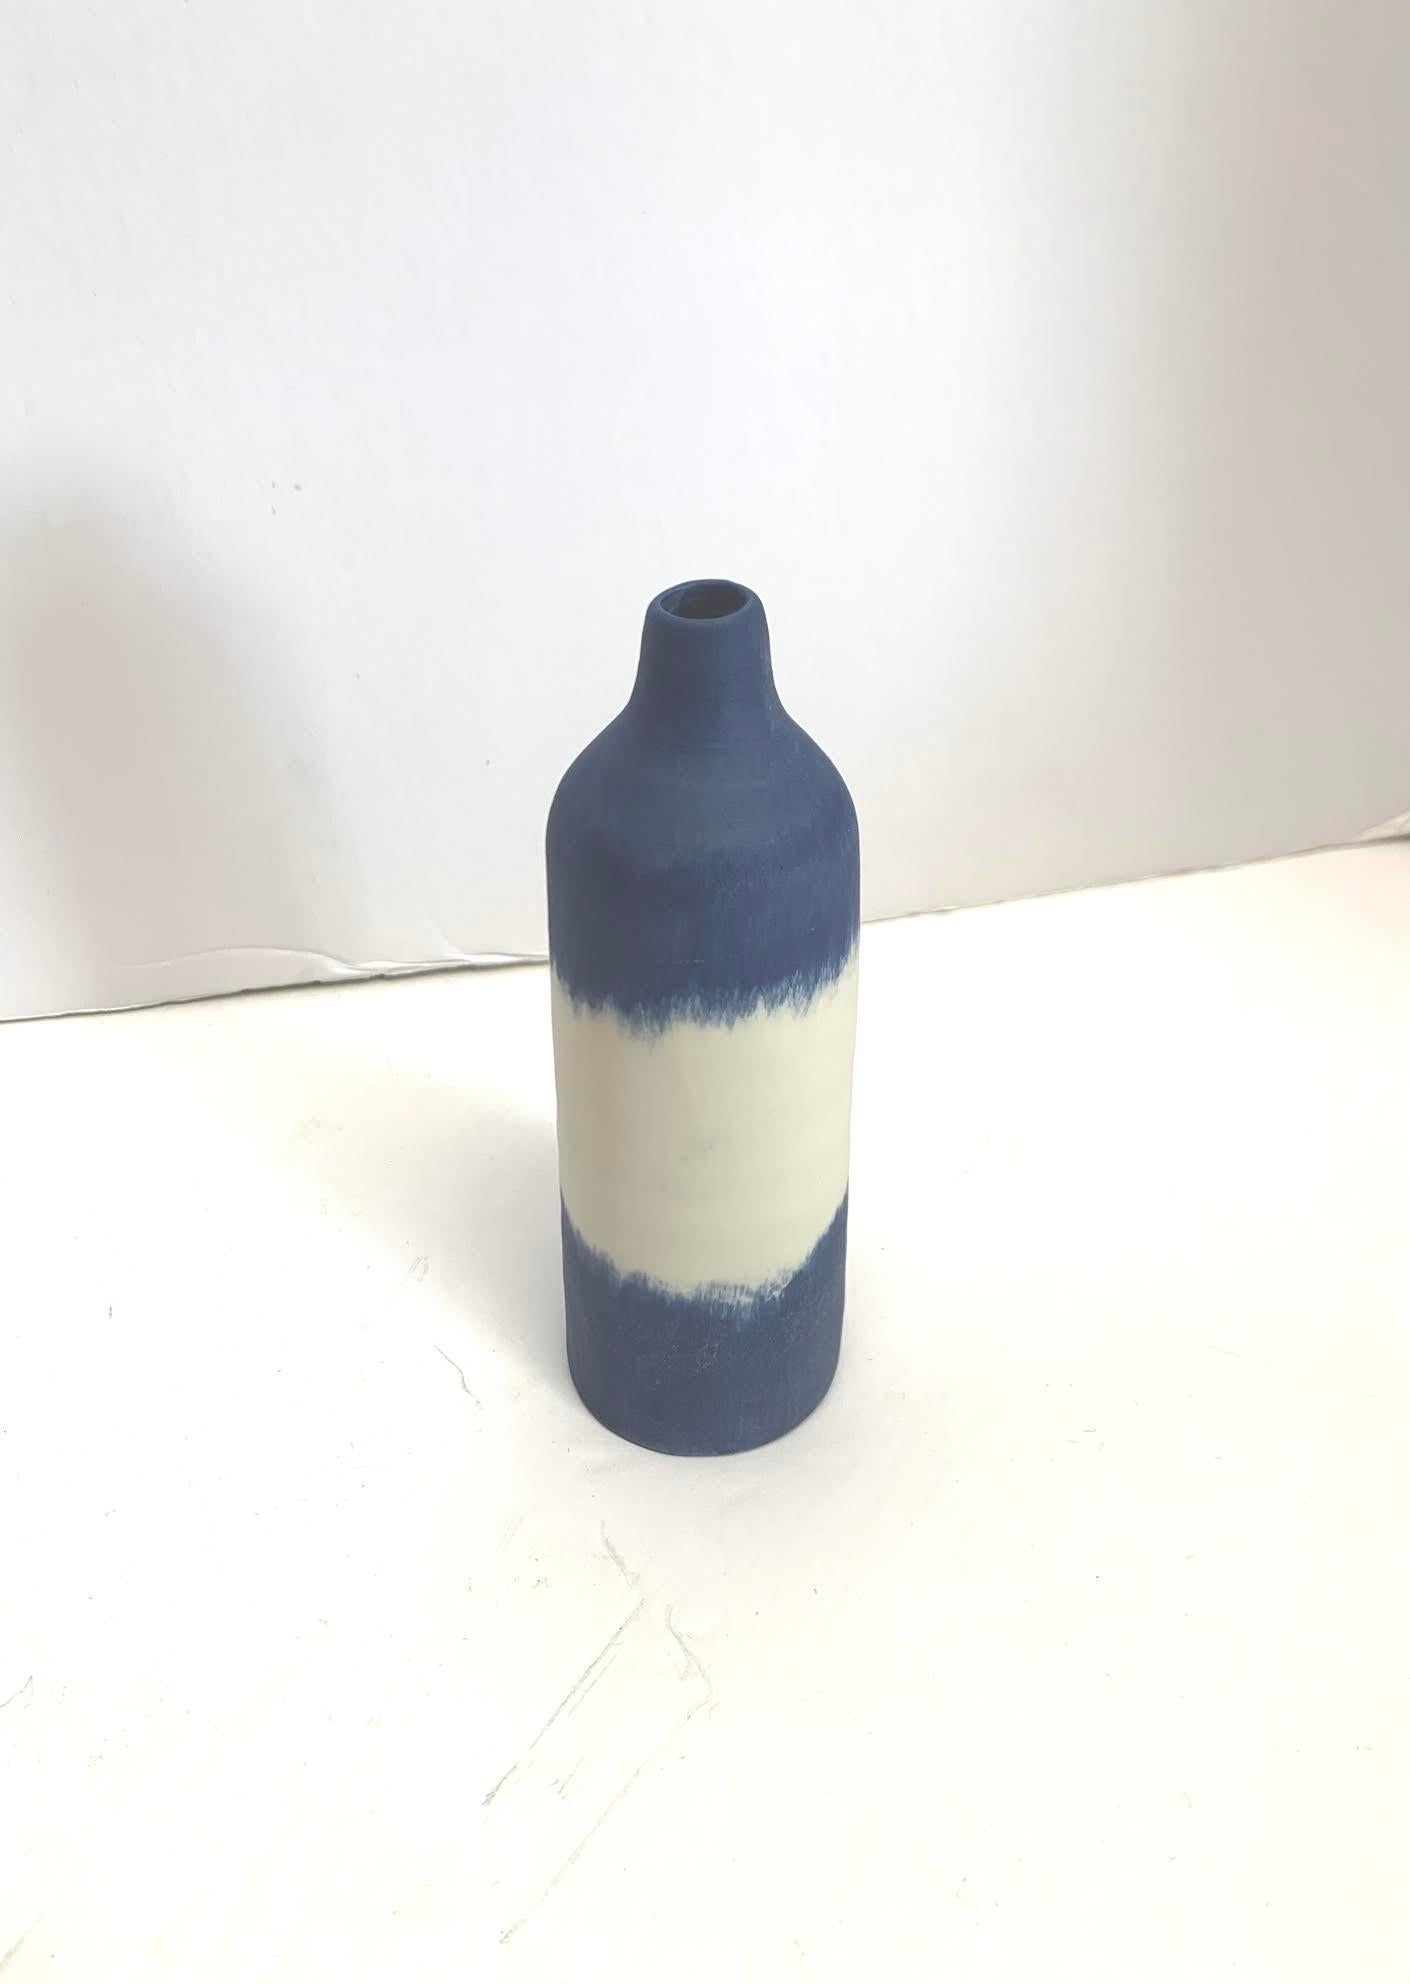 Contemporary Italian hand made ceramic blue with white band design thin vase.
Matte glaze.
Part of a large collection of blue and white diminutive vases.
See image #5.